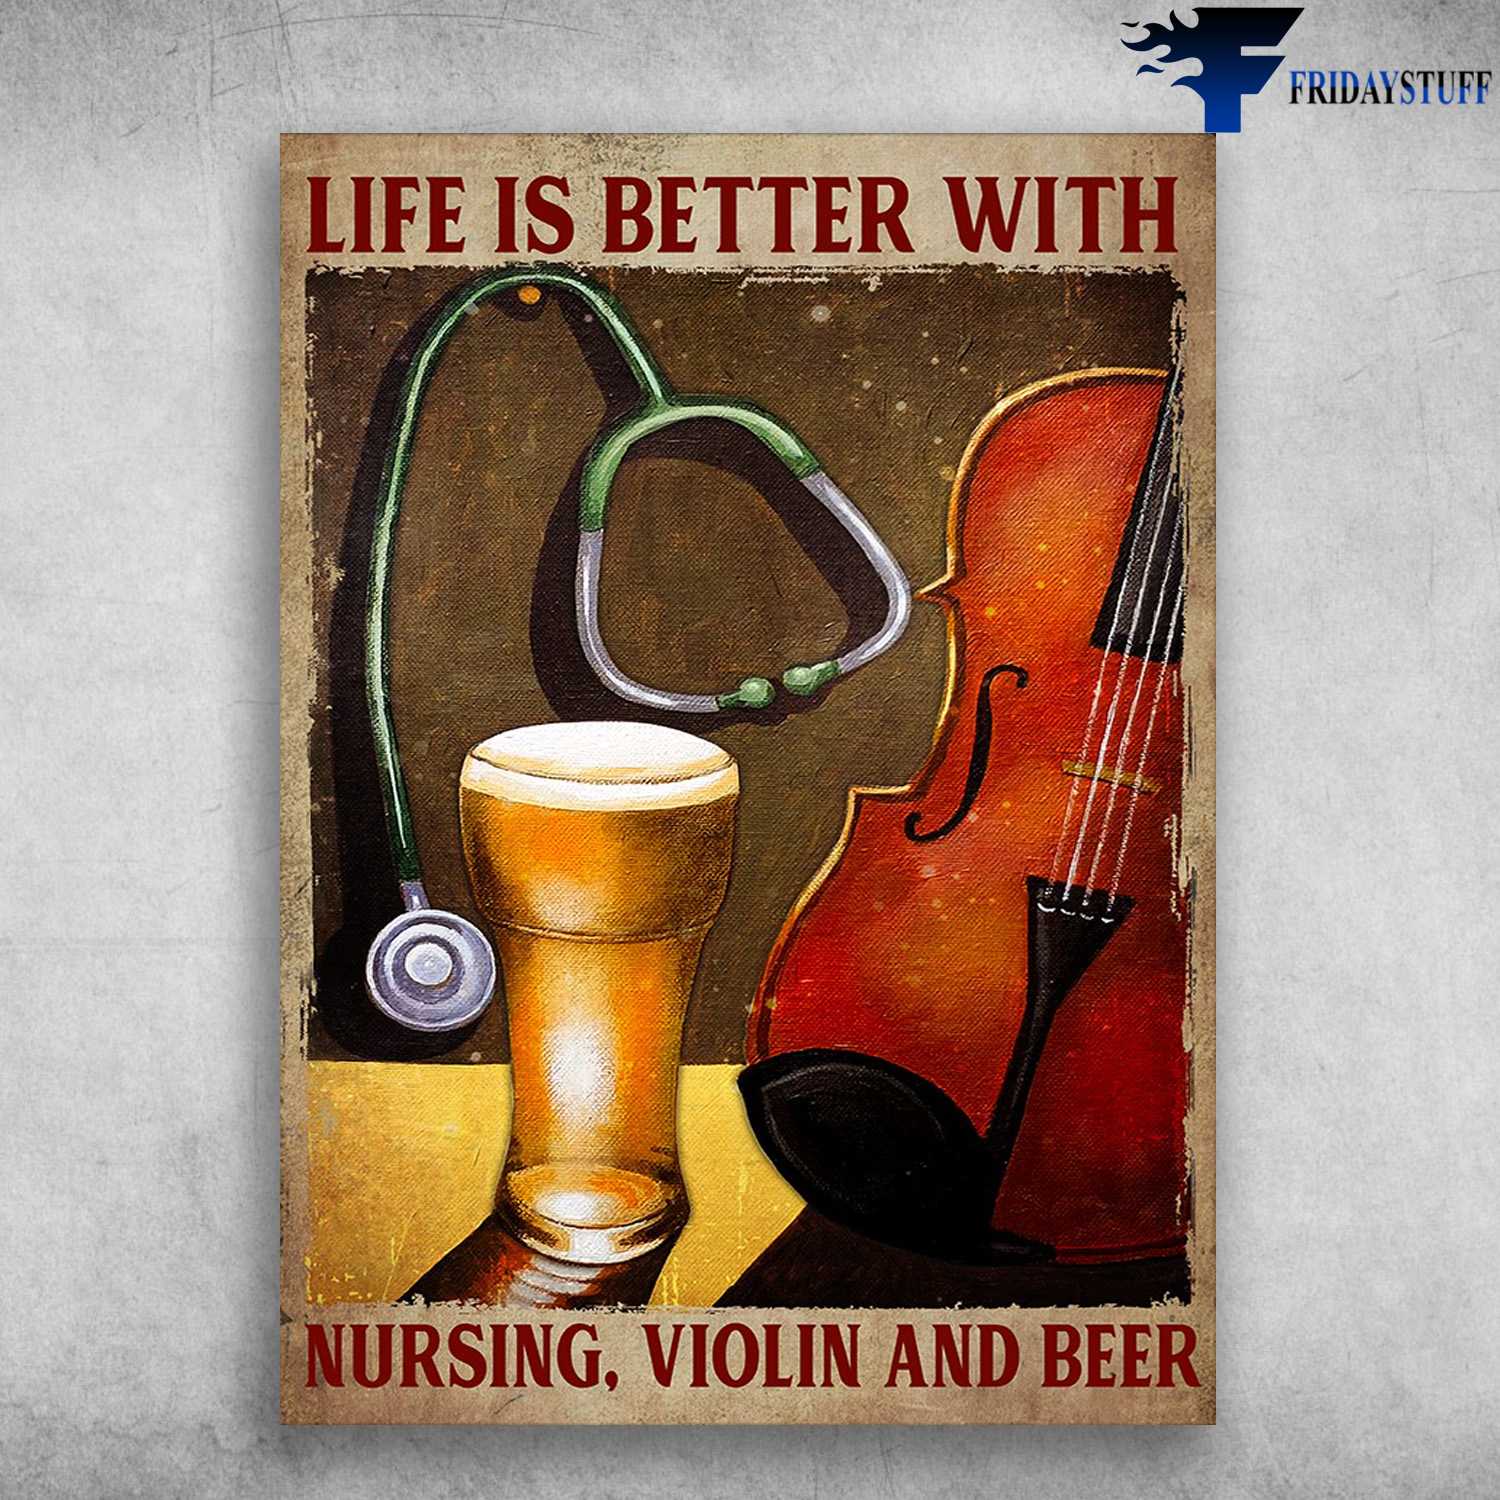 Nurse Music And Drink, Life Is Better With Nursing, Violin And Beer